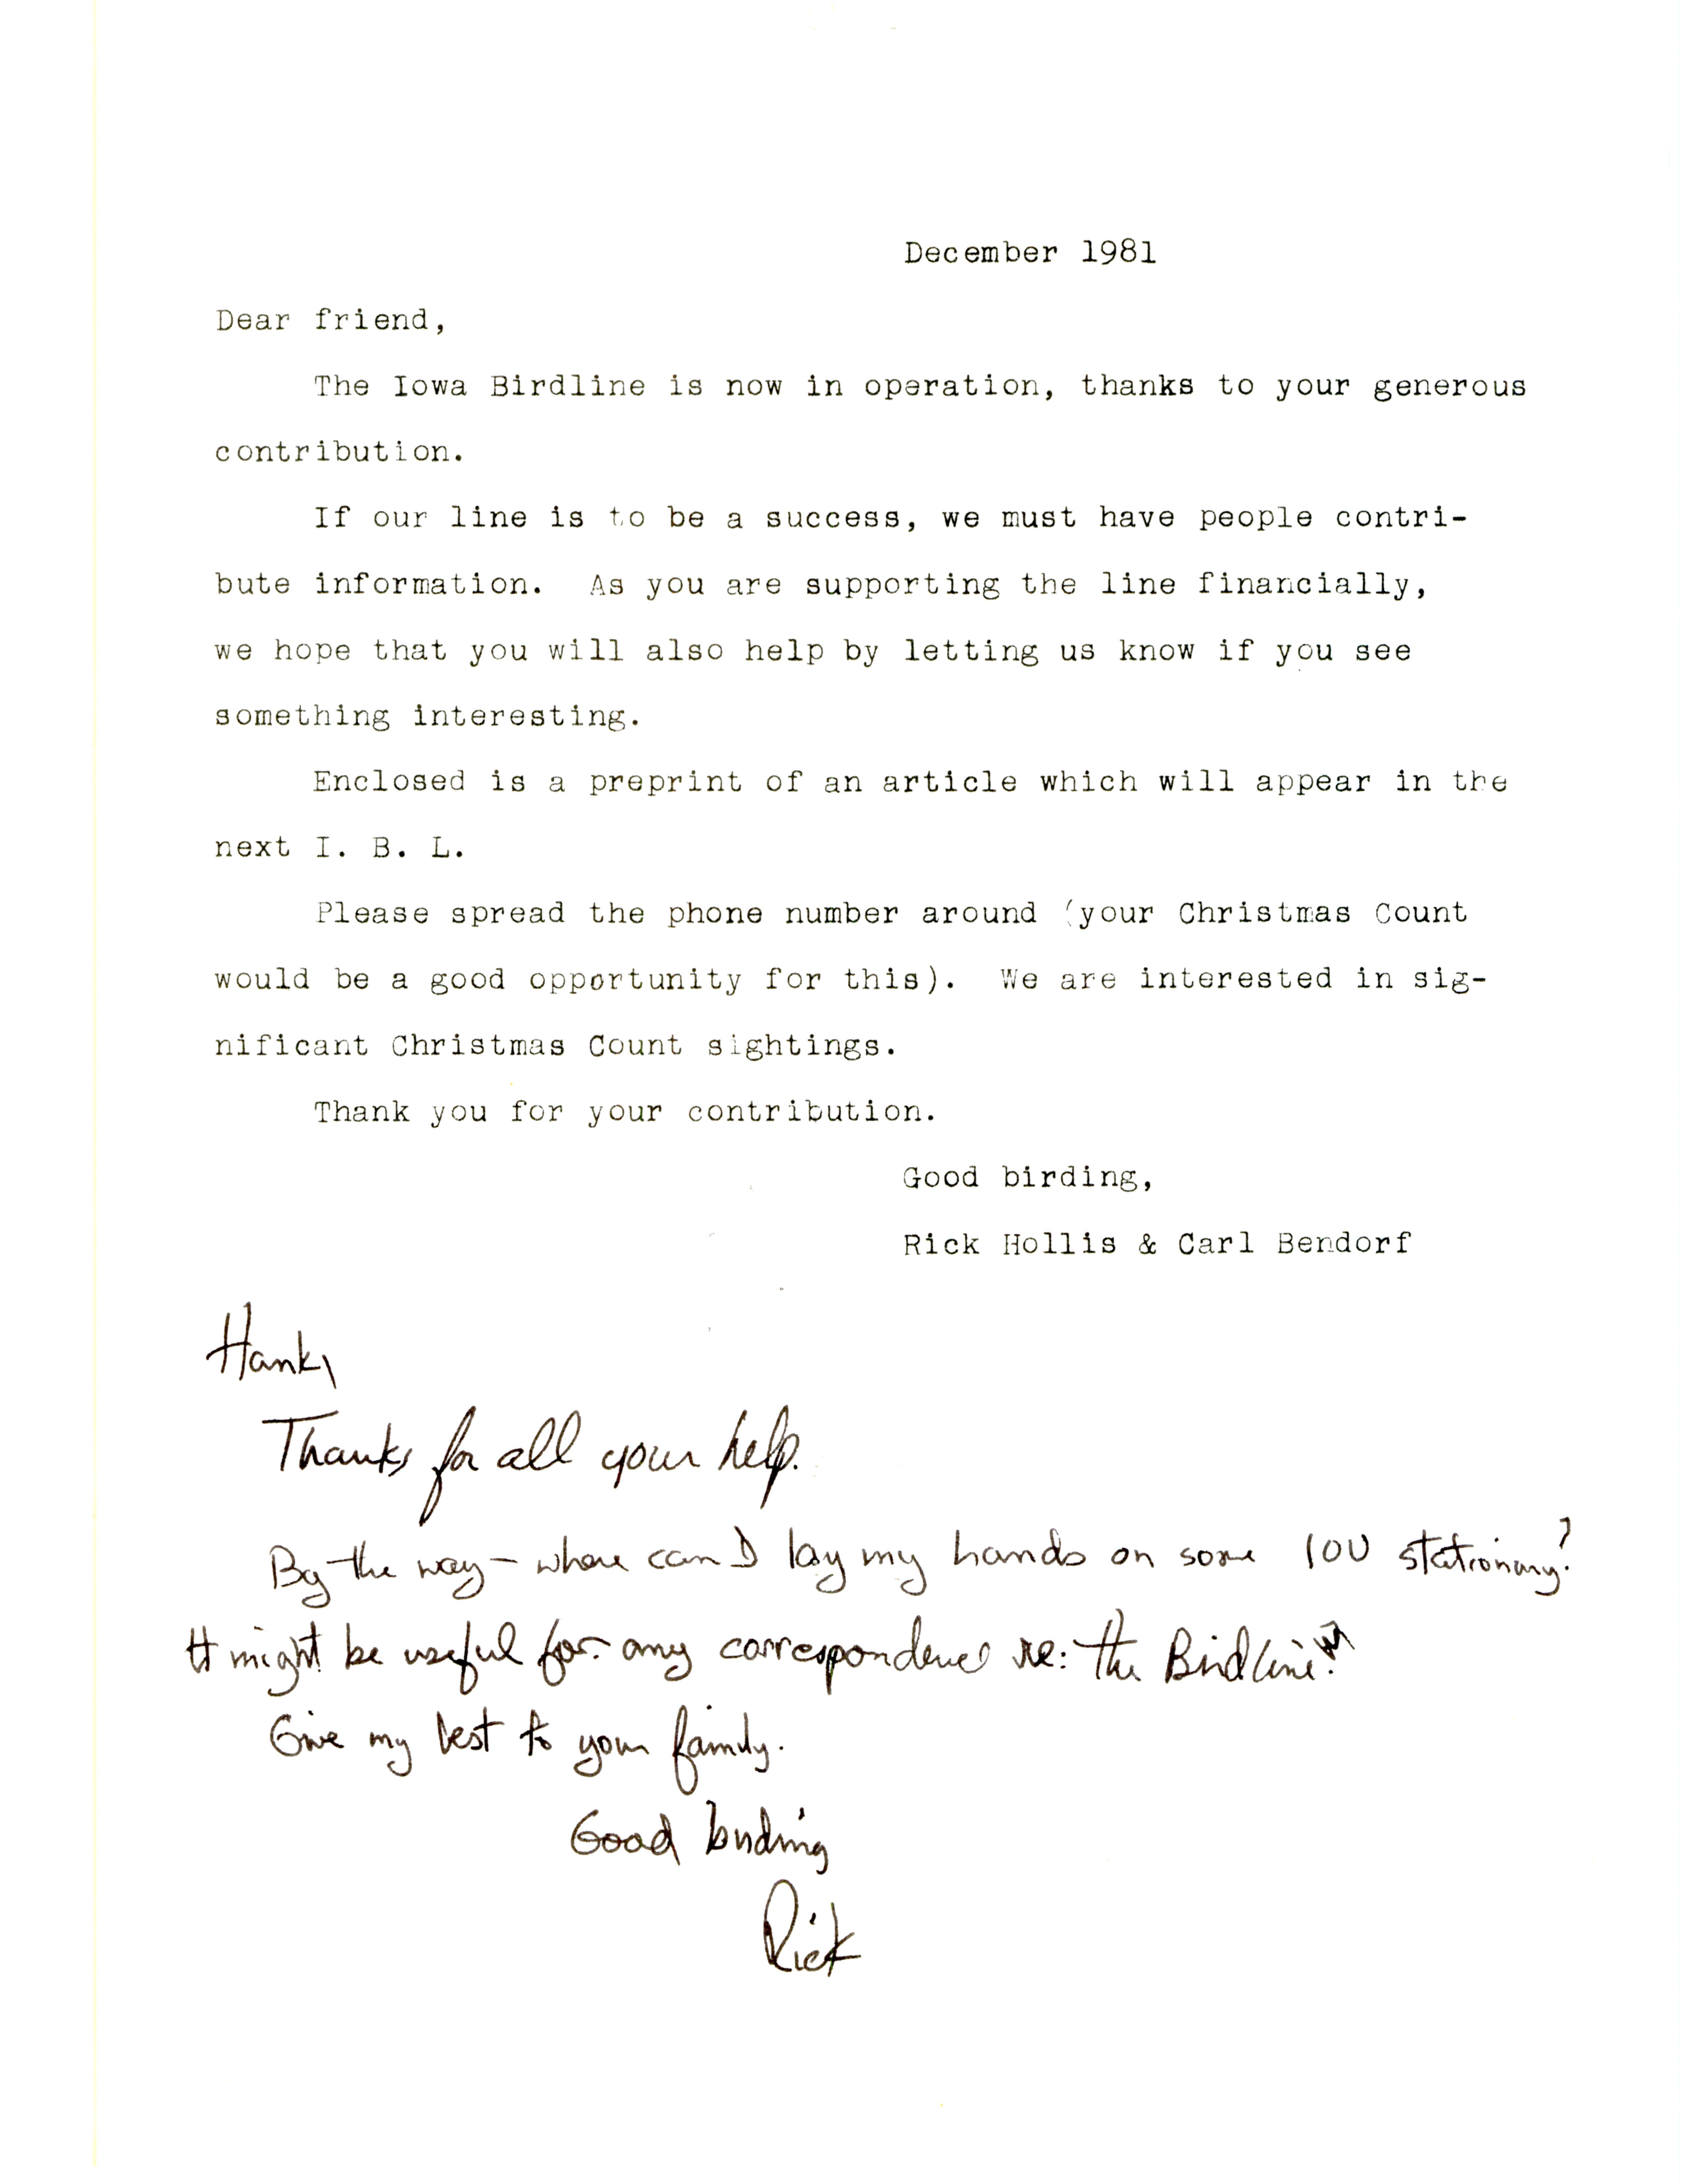 Letter to members of the Iowa Ornithologists' Union announcing the Iowa Birdline is now in operation, December 1981